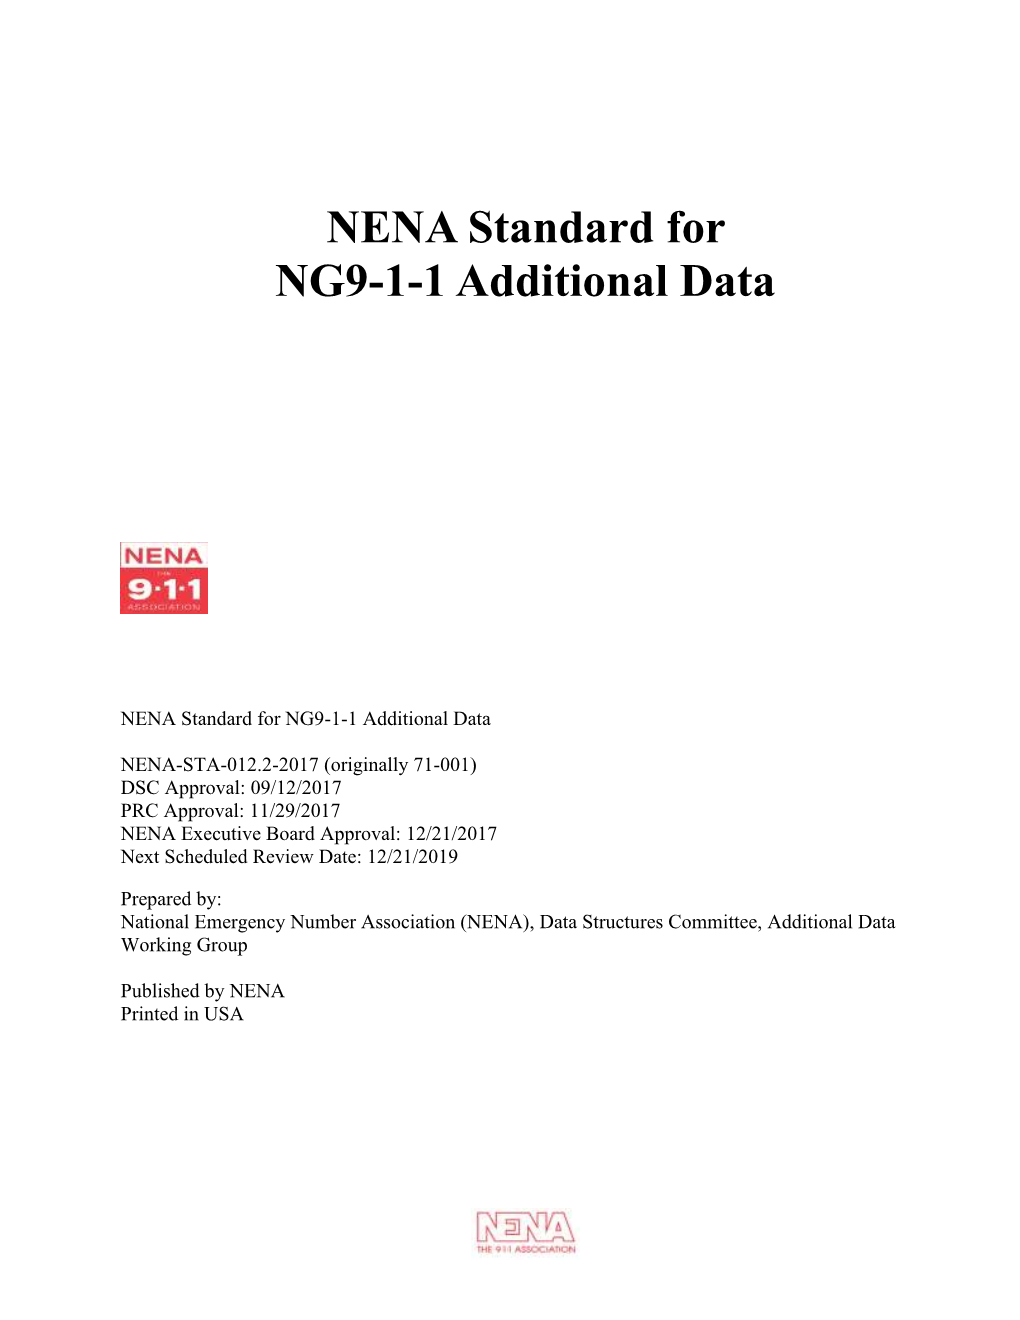 NENA Standard for NG9-1-1 Additional Data